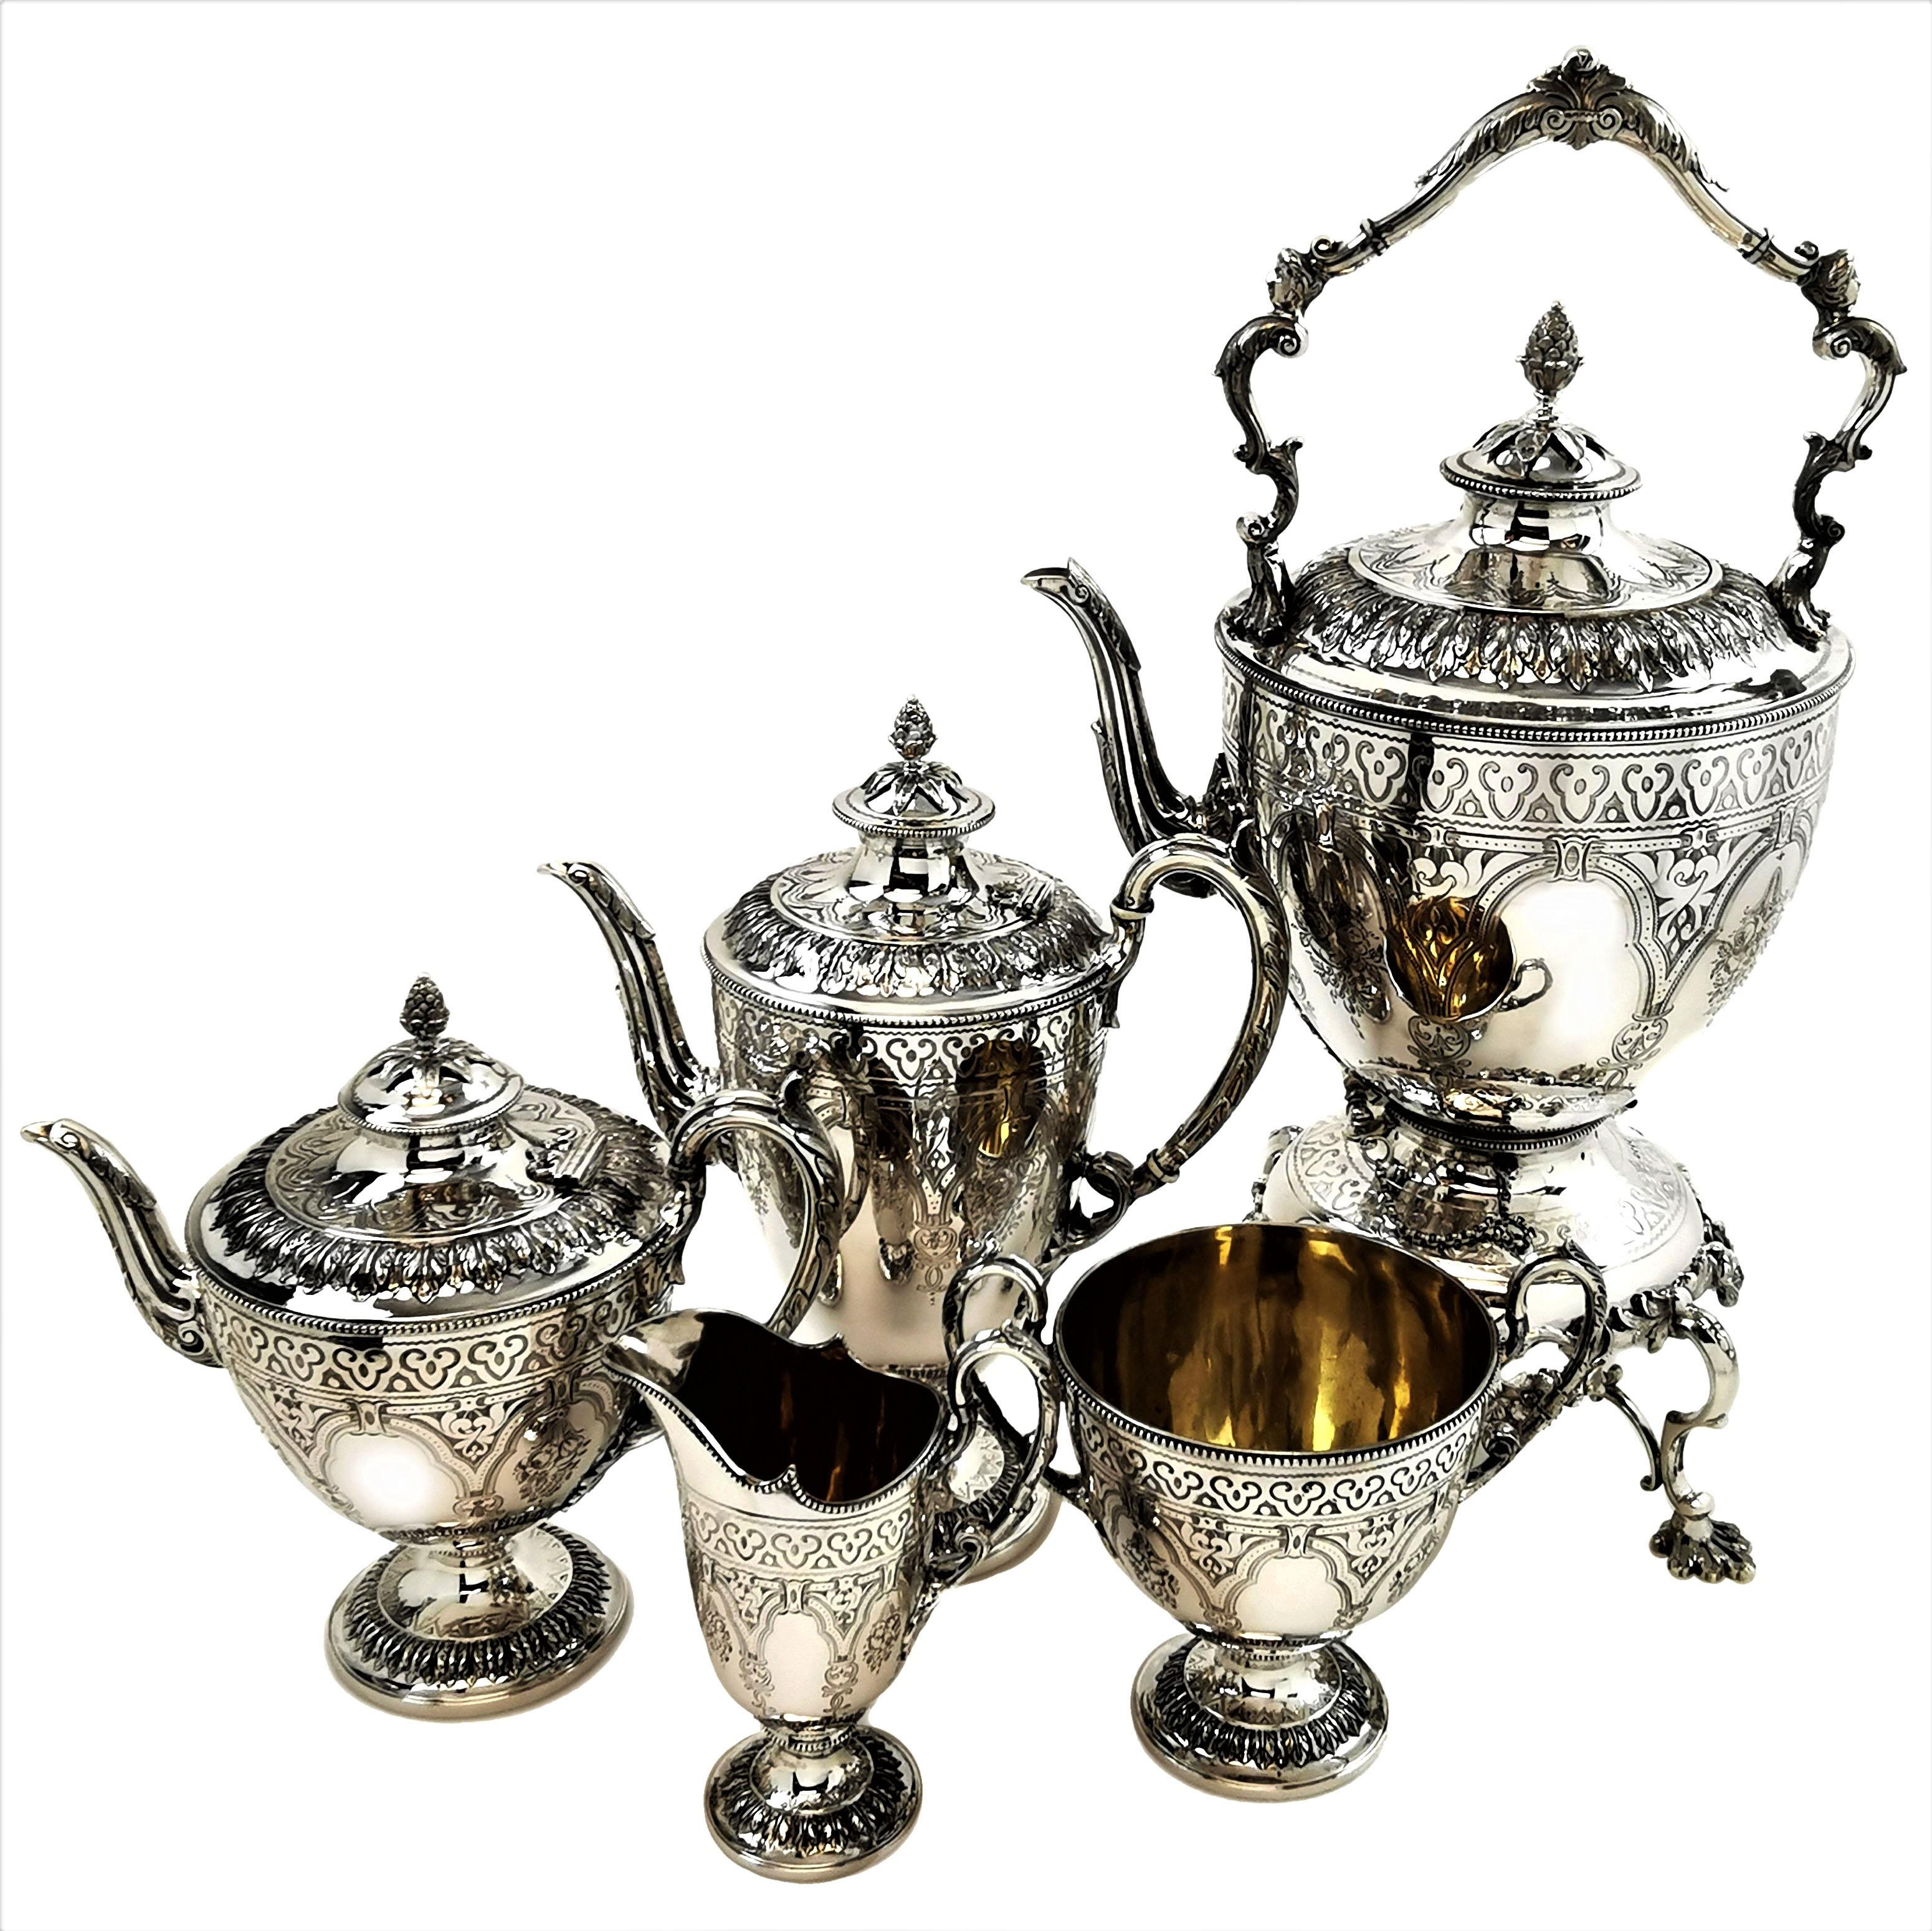 A magnificent antique Victorian sterling Silver Tea and Coffee set comprising of a Kettle on Stand, Tea Pot, Coffee Pot, Cream / Milk Jug & Sugar Bowl. Each piece of this vase shaped tea set is decorated with an elegant chased and engraved design.